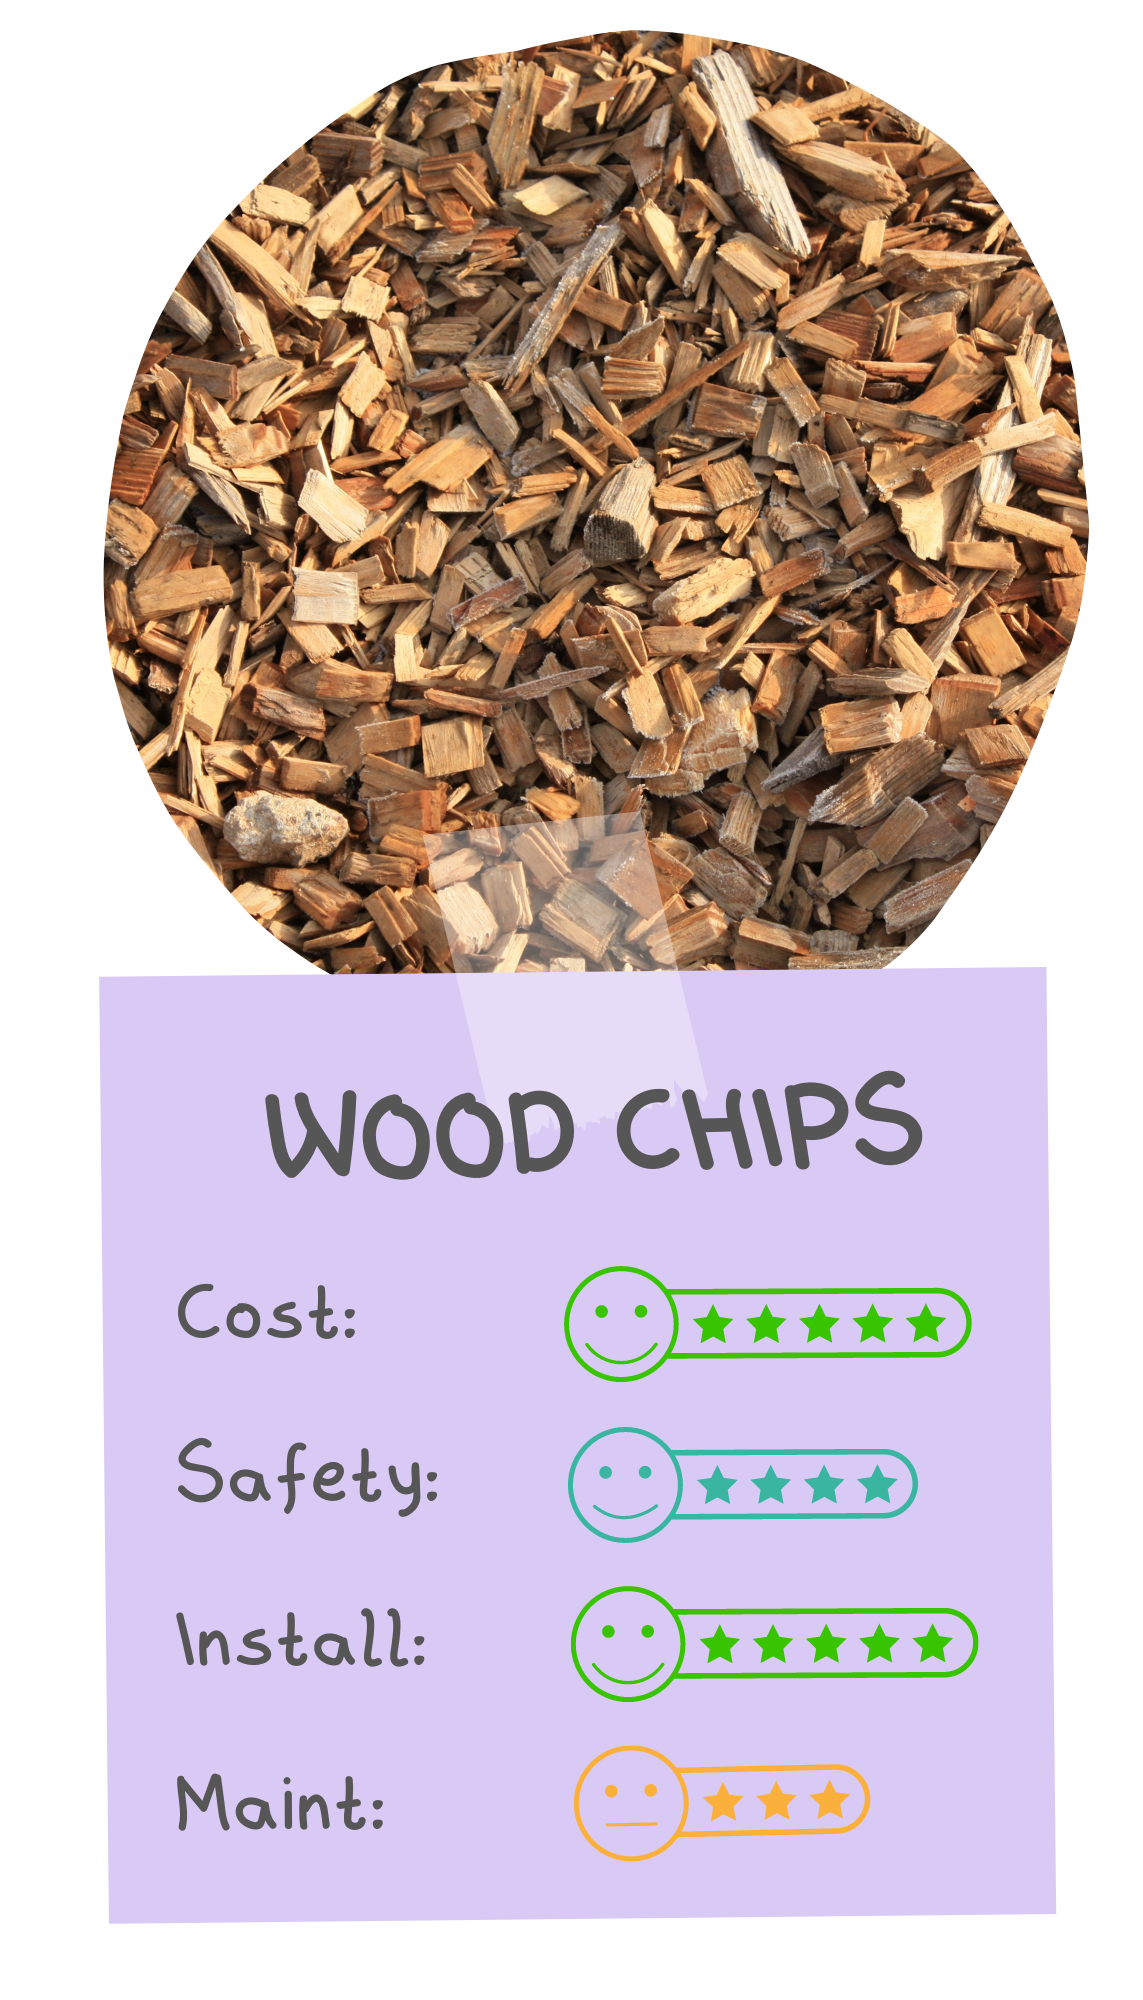 Wood chips are rated by four categories. They receive 5 stars for cost, 4 stars for safety, 5 stars for installation, and 3 stars for maintenance.